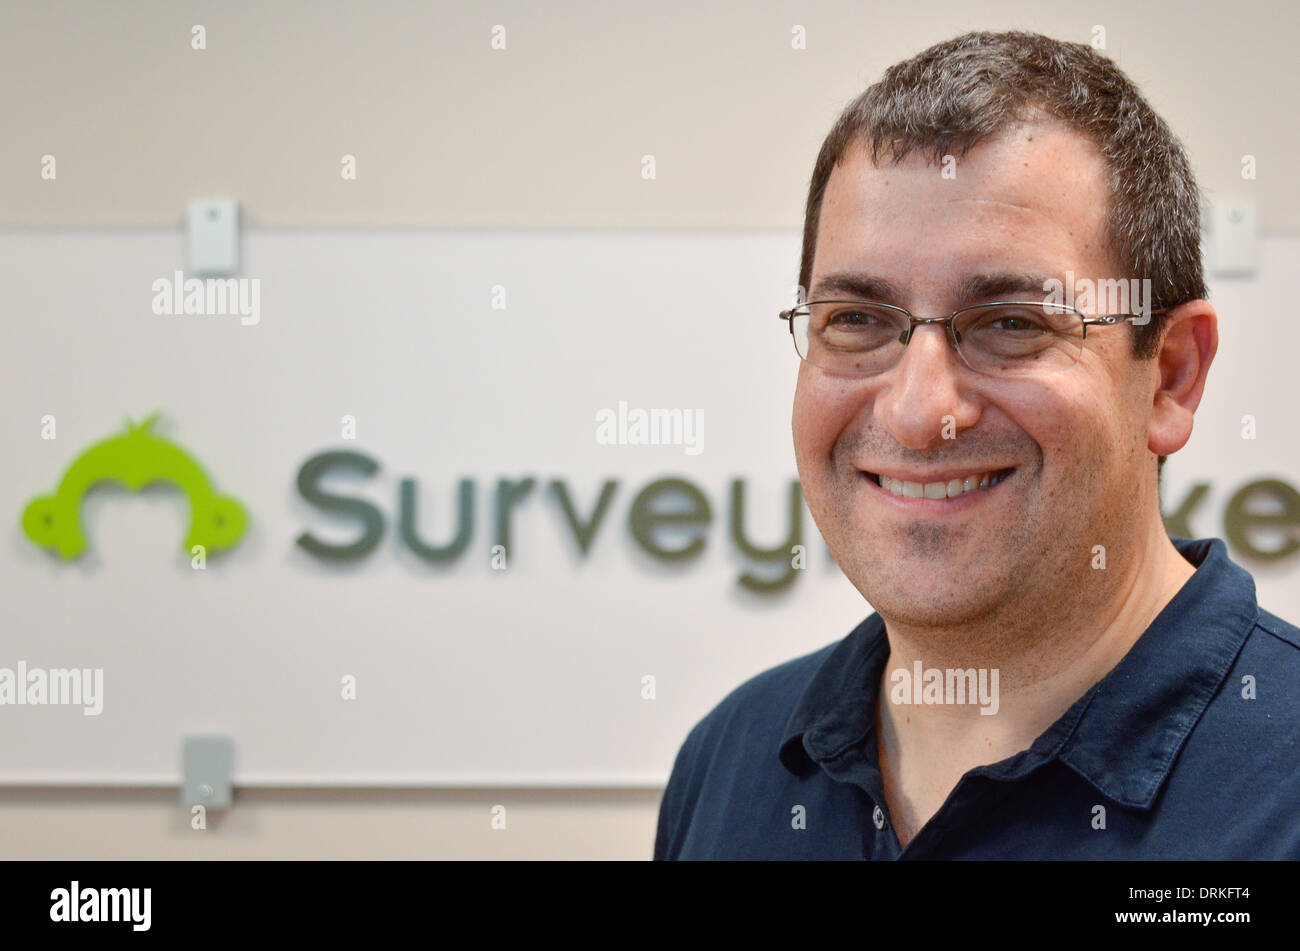 Under CEO David Goldberg, online market researcher SurveyMonkey has become one of the world's largest polling firms. Goldberg, photographed in front of the company logo at SurveyMonkey HQ in Palo Alto, CA, is the husband of Facebook COO and bestseller aut Stock Photo